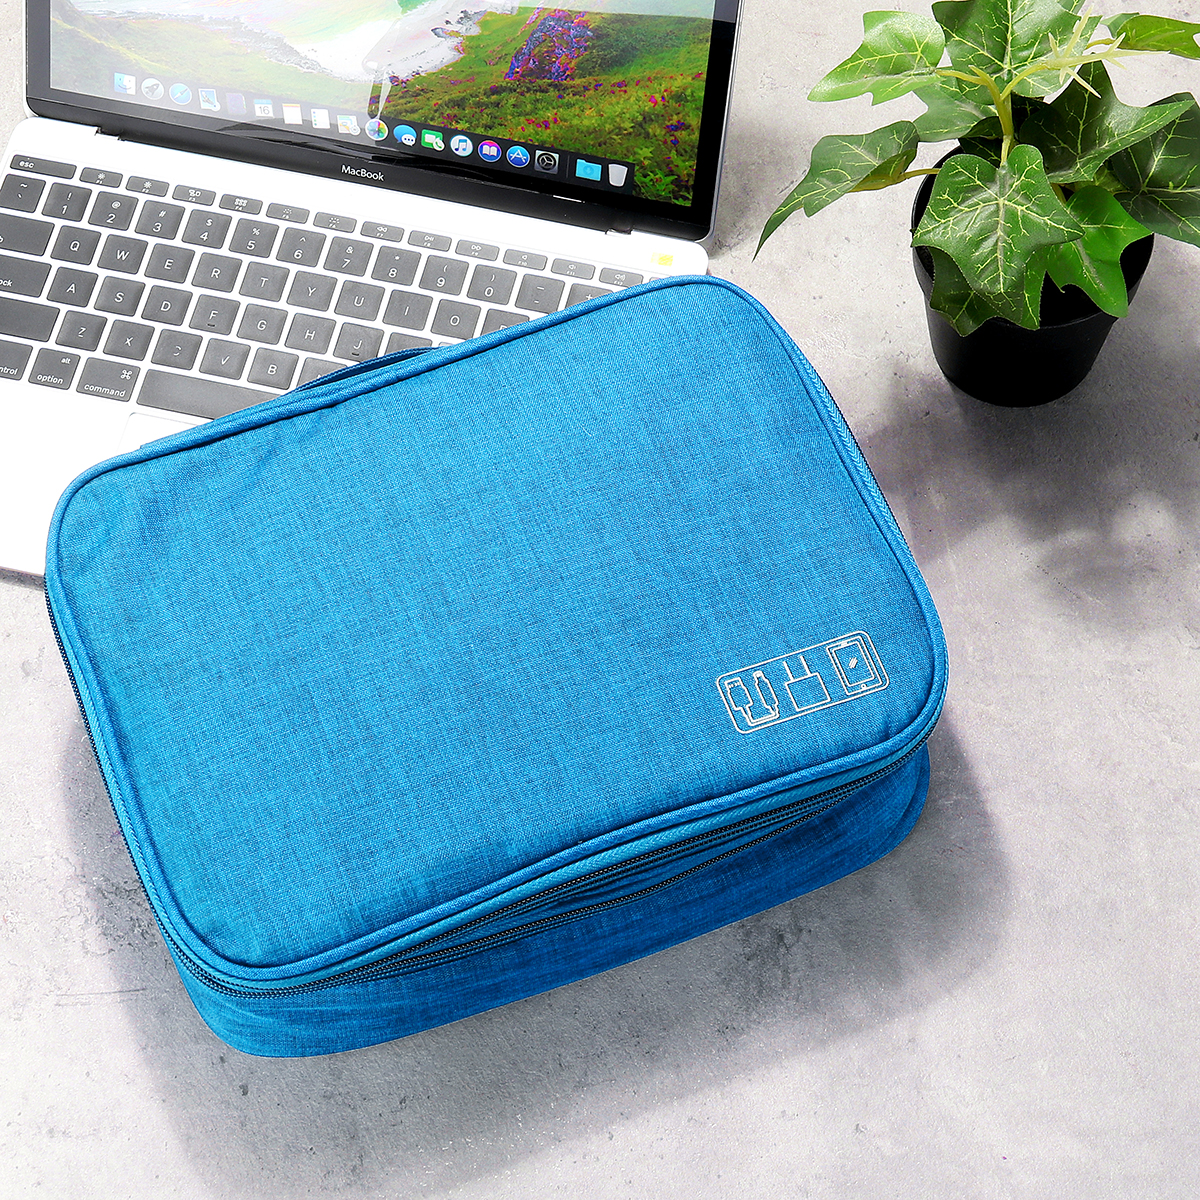 Data-Cable-Storage-Bag-Multifunctional-Digital-Devices-Stationery-Case-Portable-Travel-Electronic-Po-1782315-6